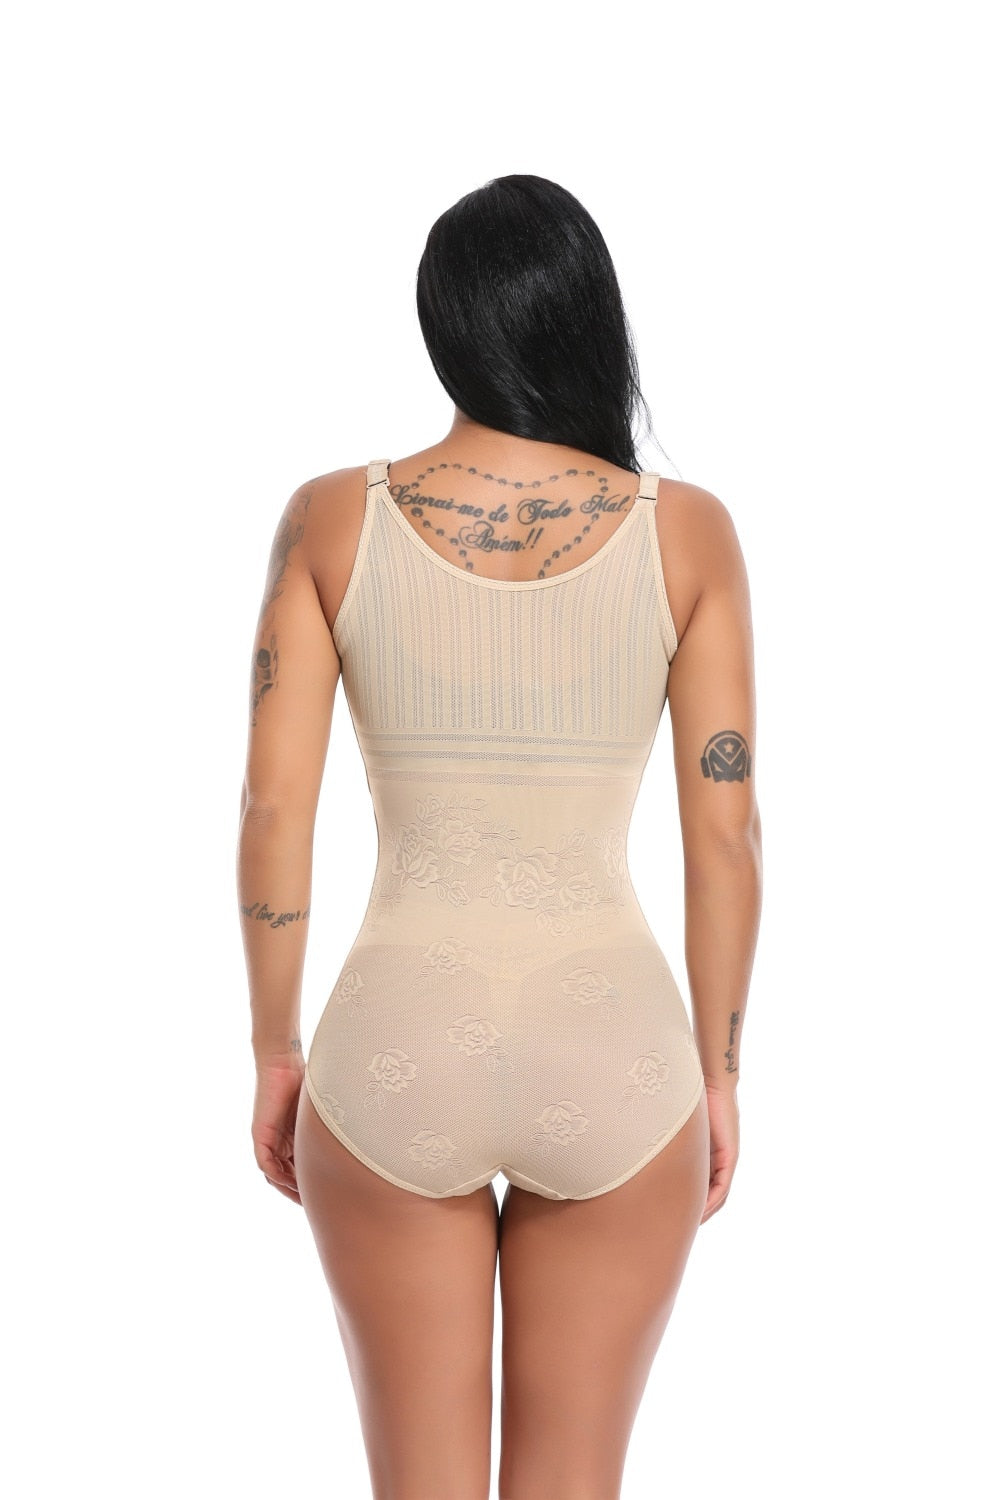 Women Slimming Seamless Firm Control Bodysuit Shapewear Open Bust Cors Trends Nyc